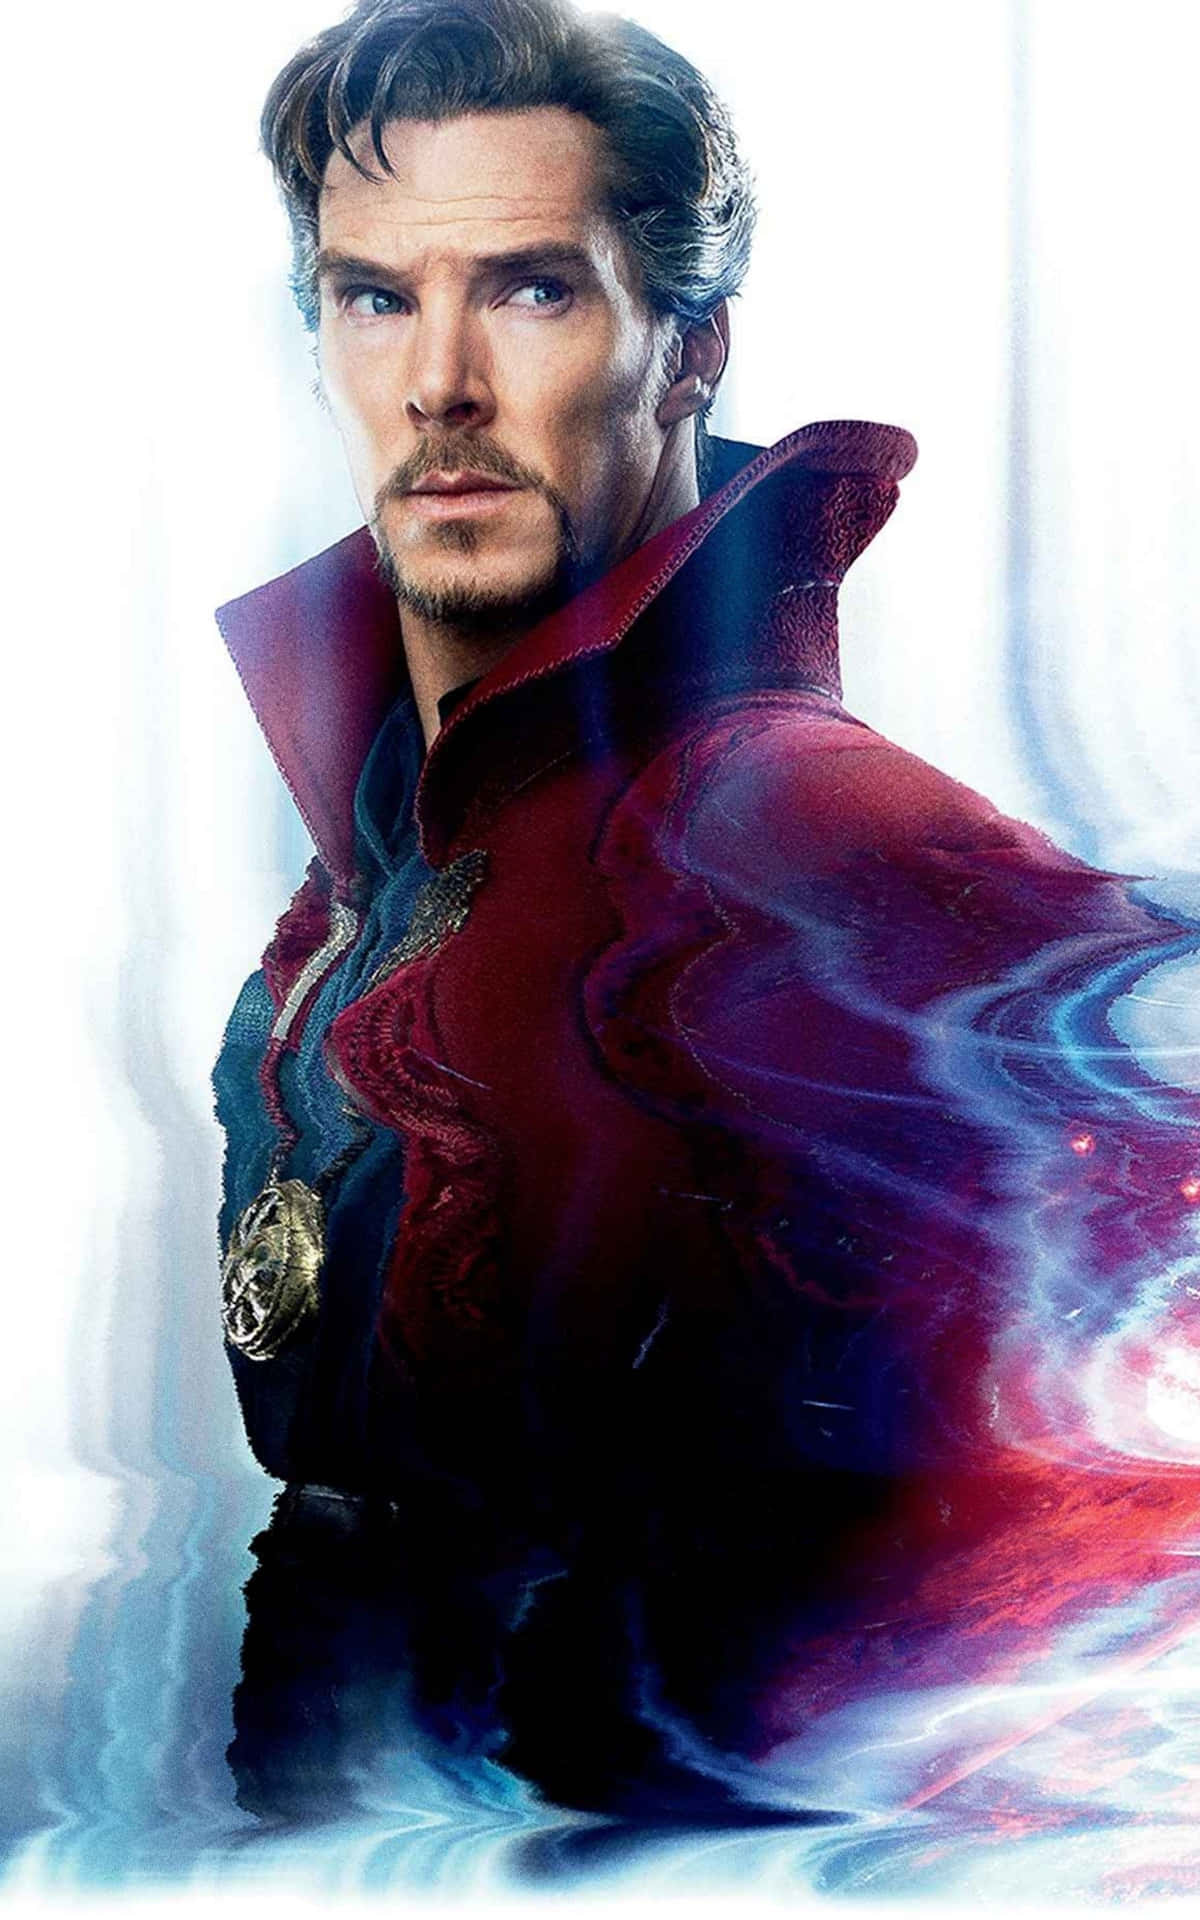 Doctor Strange using his mystic abilities to save the world